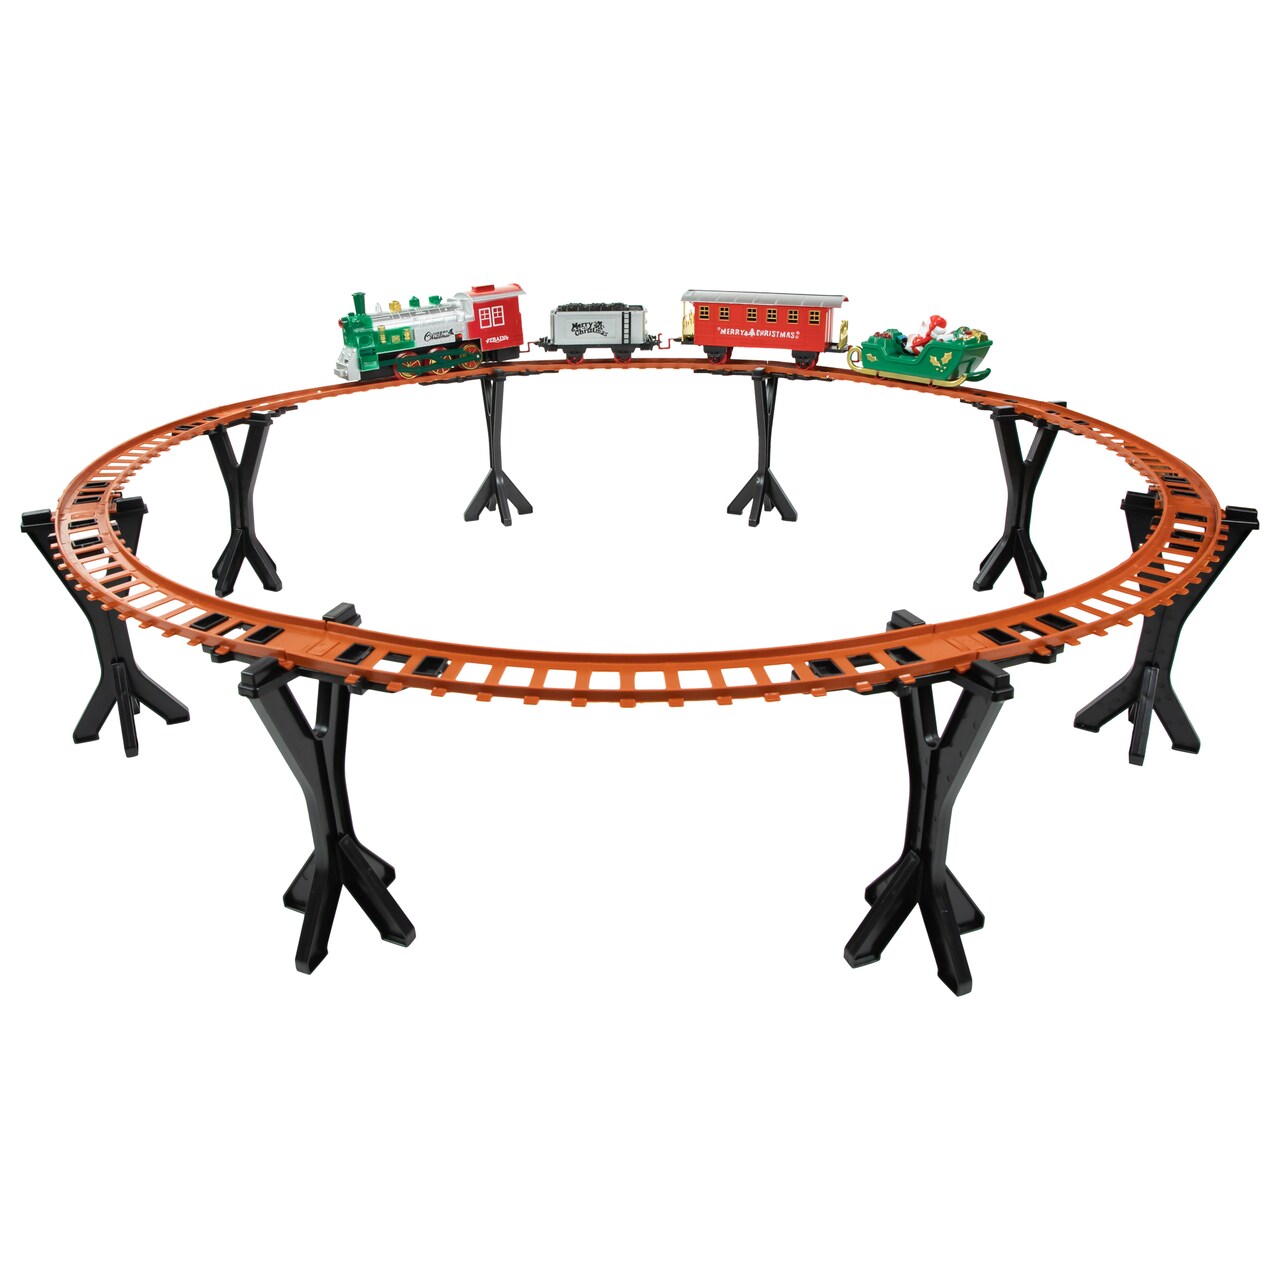 Northlight 36 Pc Battery Operated Lighted and Animated Train Set with Raised Track and Sound